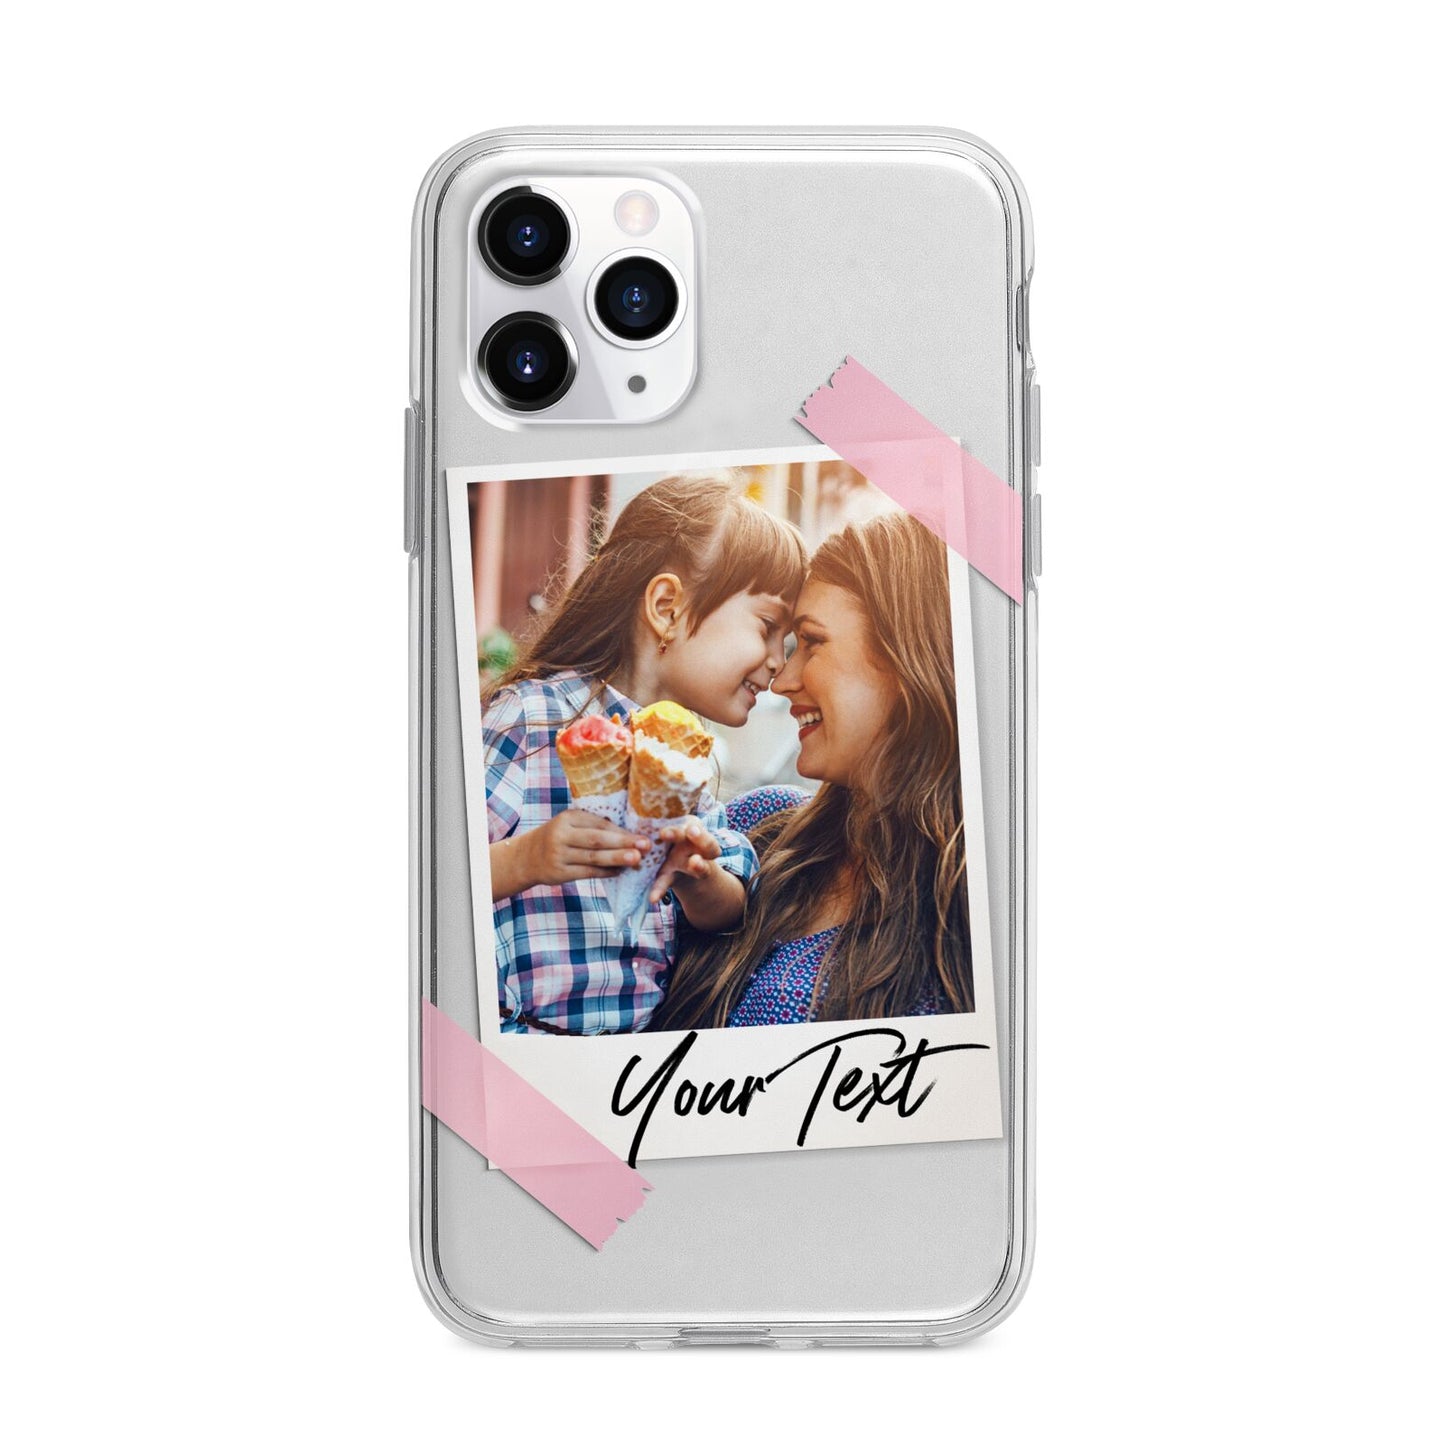 Photo Frame Apple iPhone 11 Pro Max in Silver with Bumper Case